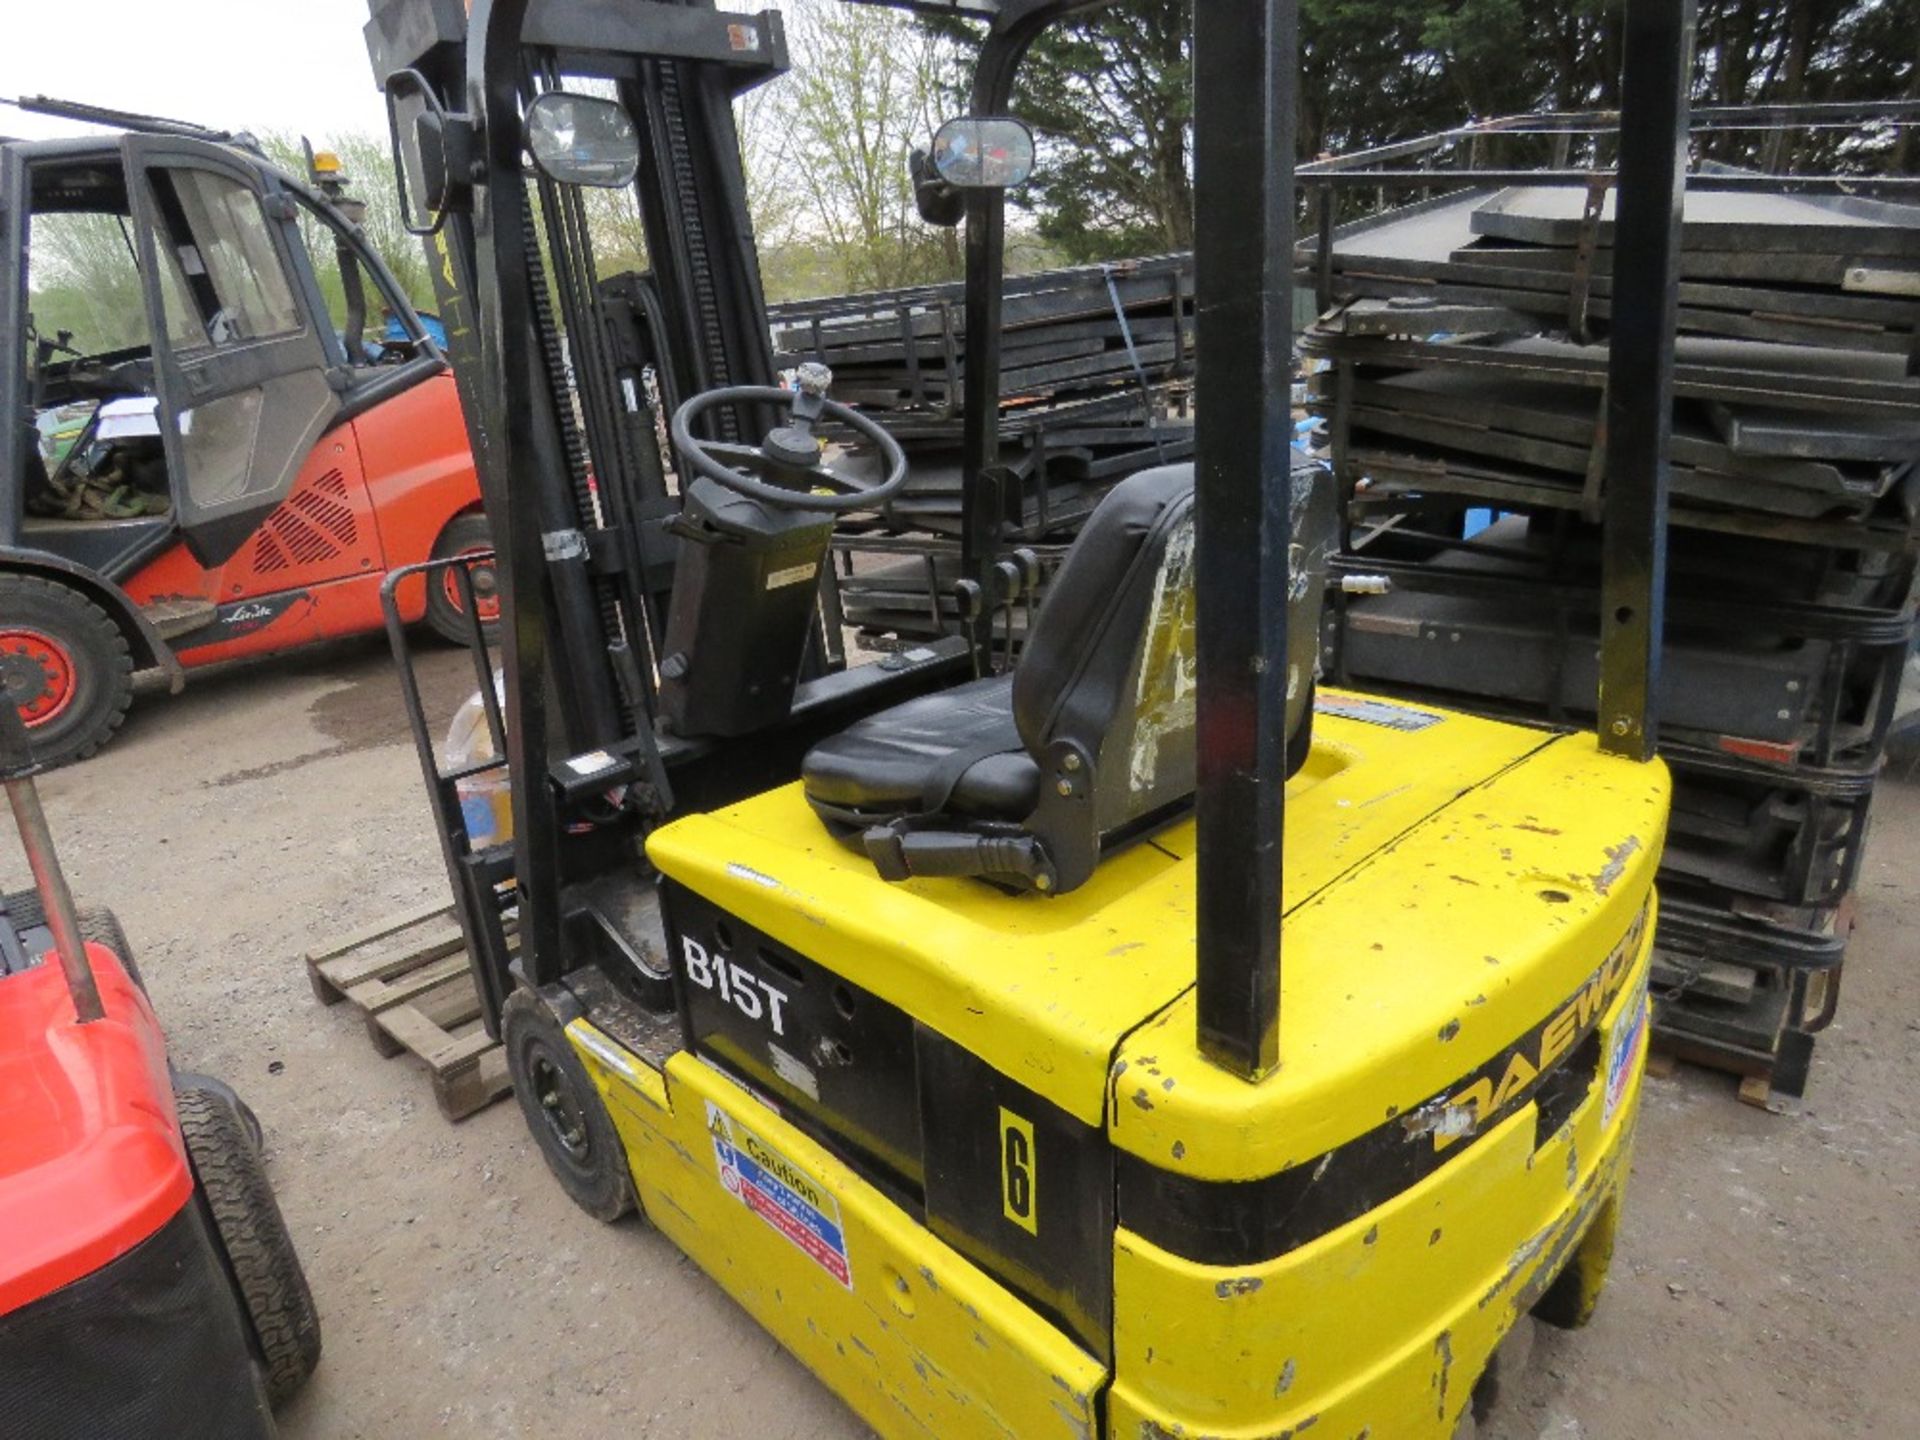 bidding increment now £100 DAEWOO BST15T-2 3 WHEEL BATTERY FORKLIFT WITH CHARGER. - Image 6 of 6